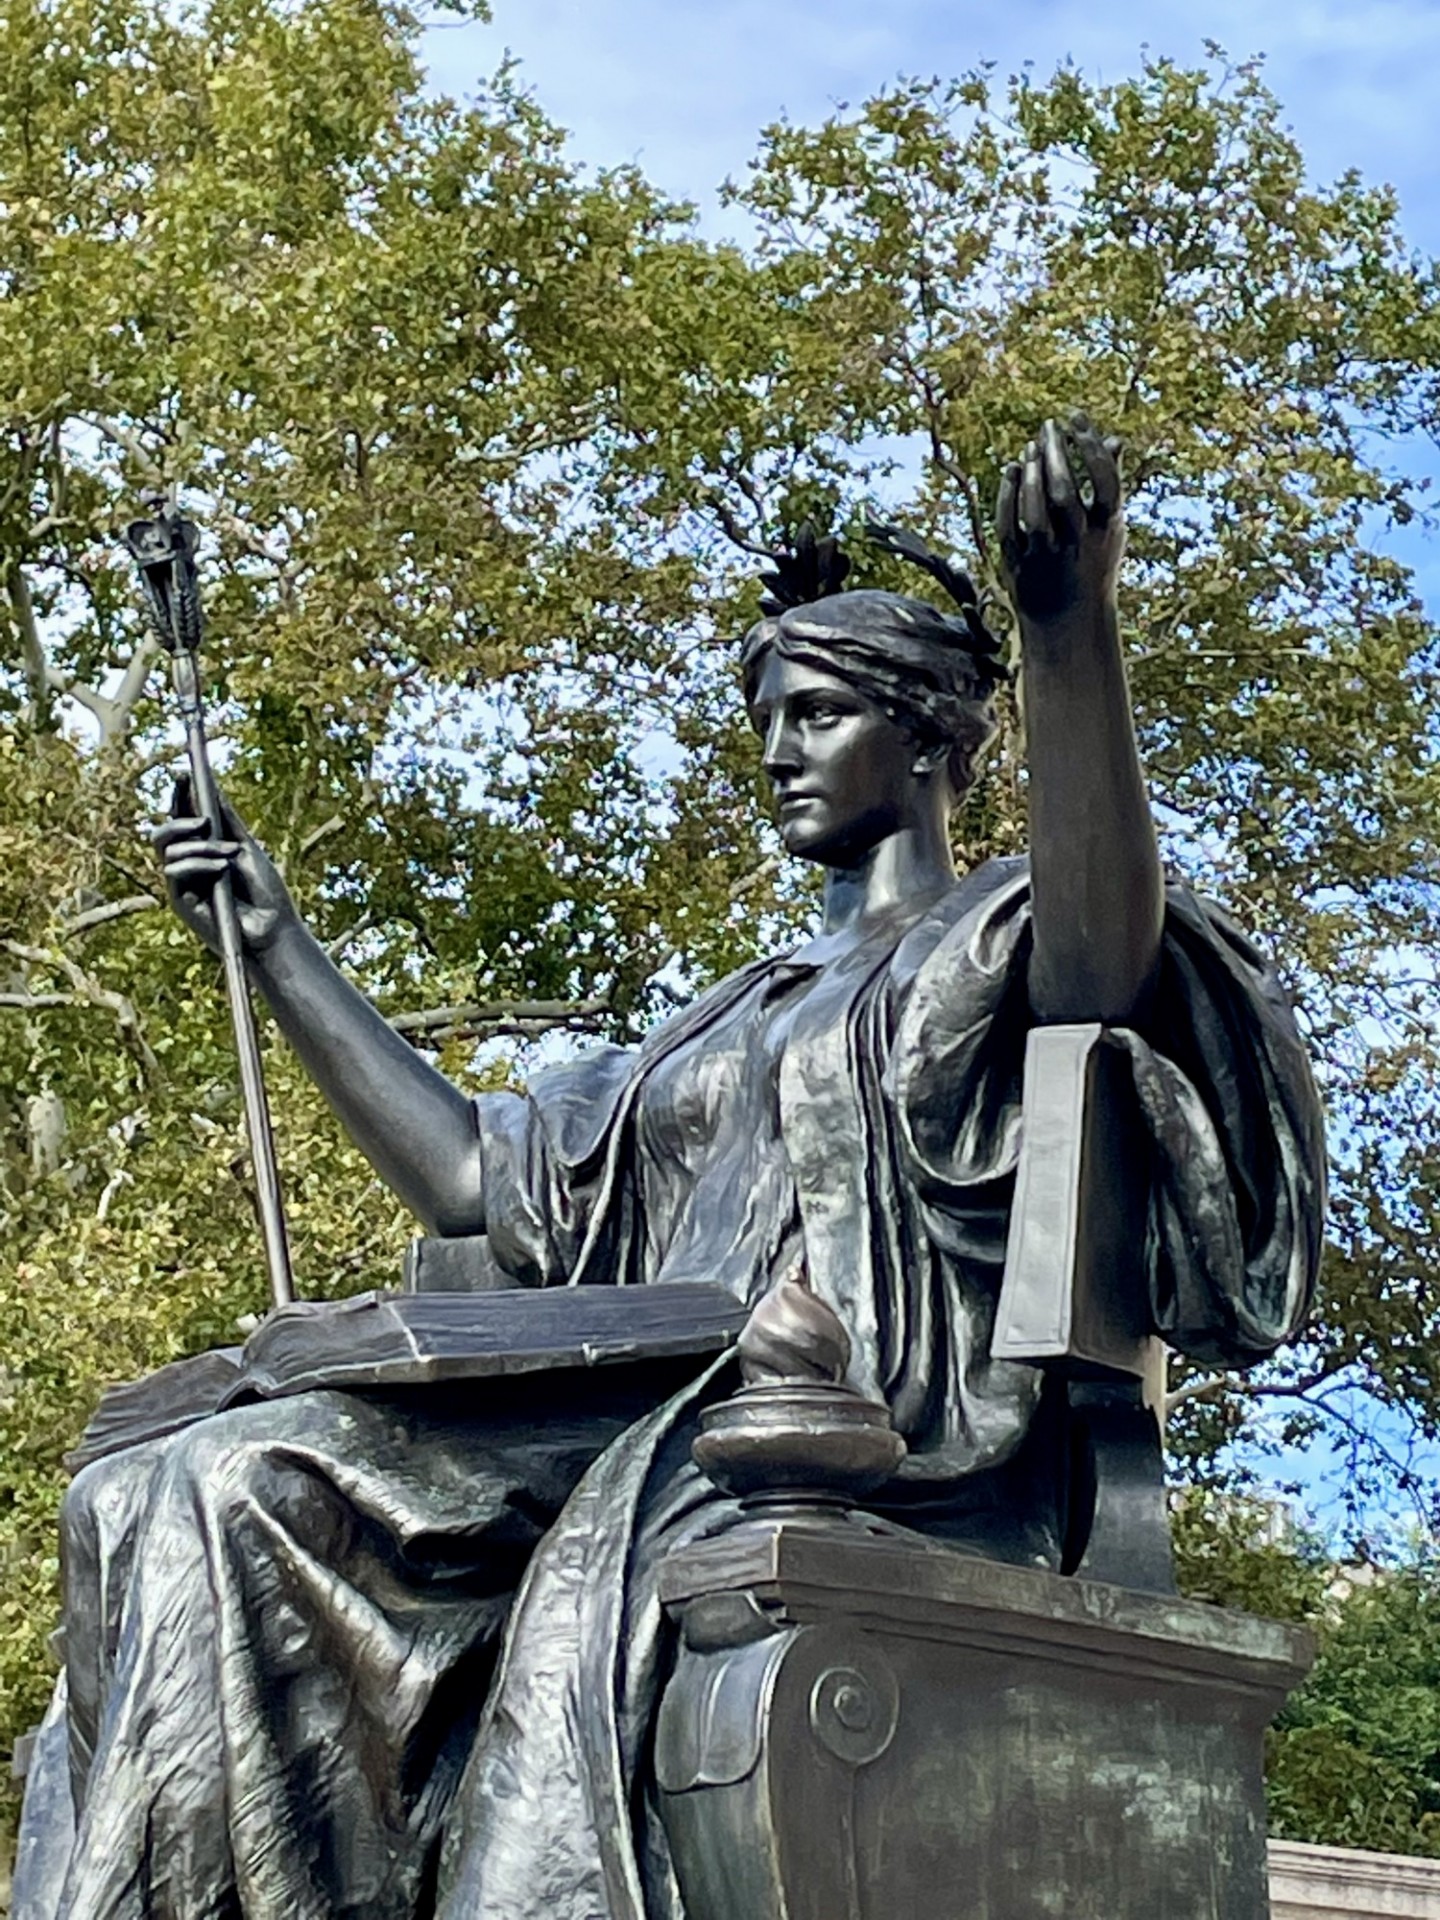 Close-up of Alma Mater, bronze sculpture by Daniel Chester French